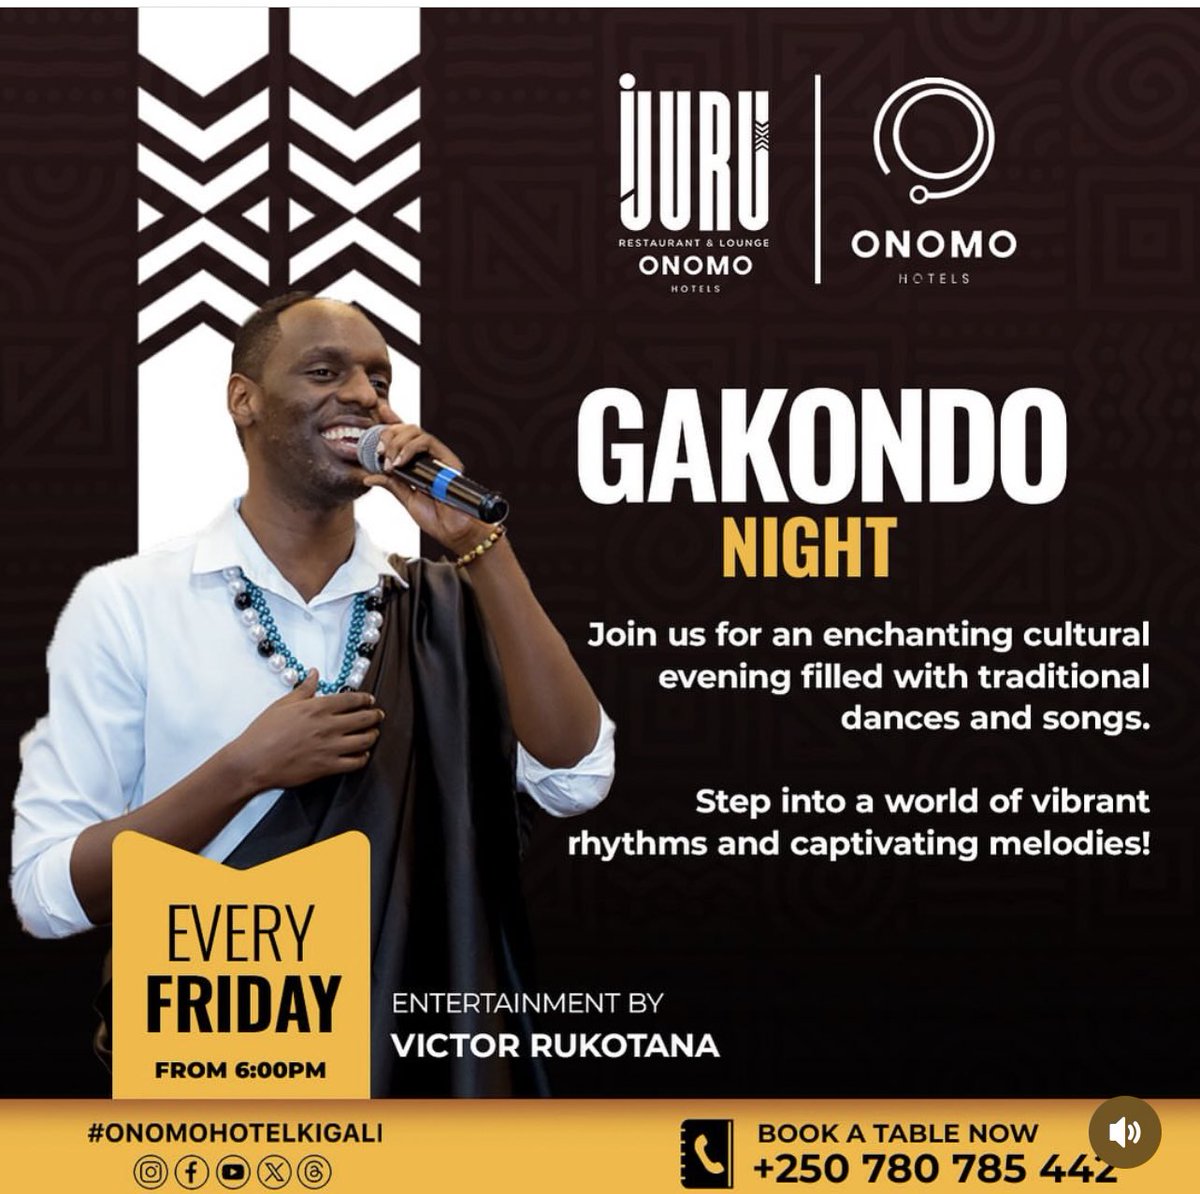 Tomorrow we go Party Gakondo Music at Onomo Hotel with @VRukotana Bring your friends , family , wife to enjoy your fav weekend . Every friday we make you happy traditionally . Live Band Music . #Rwandan Music